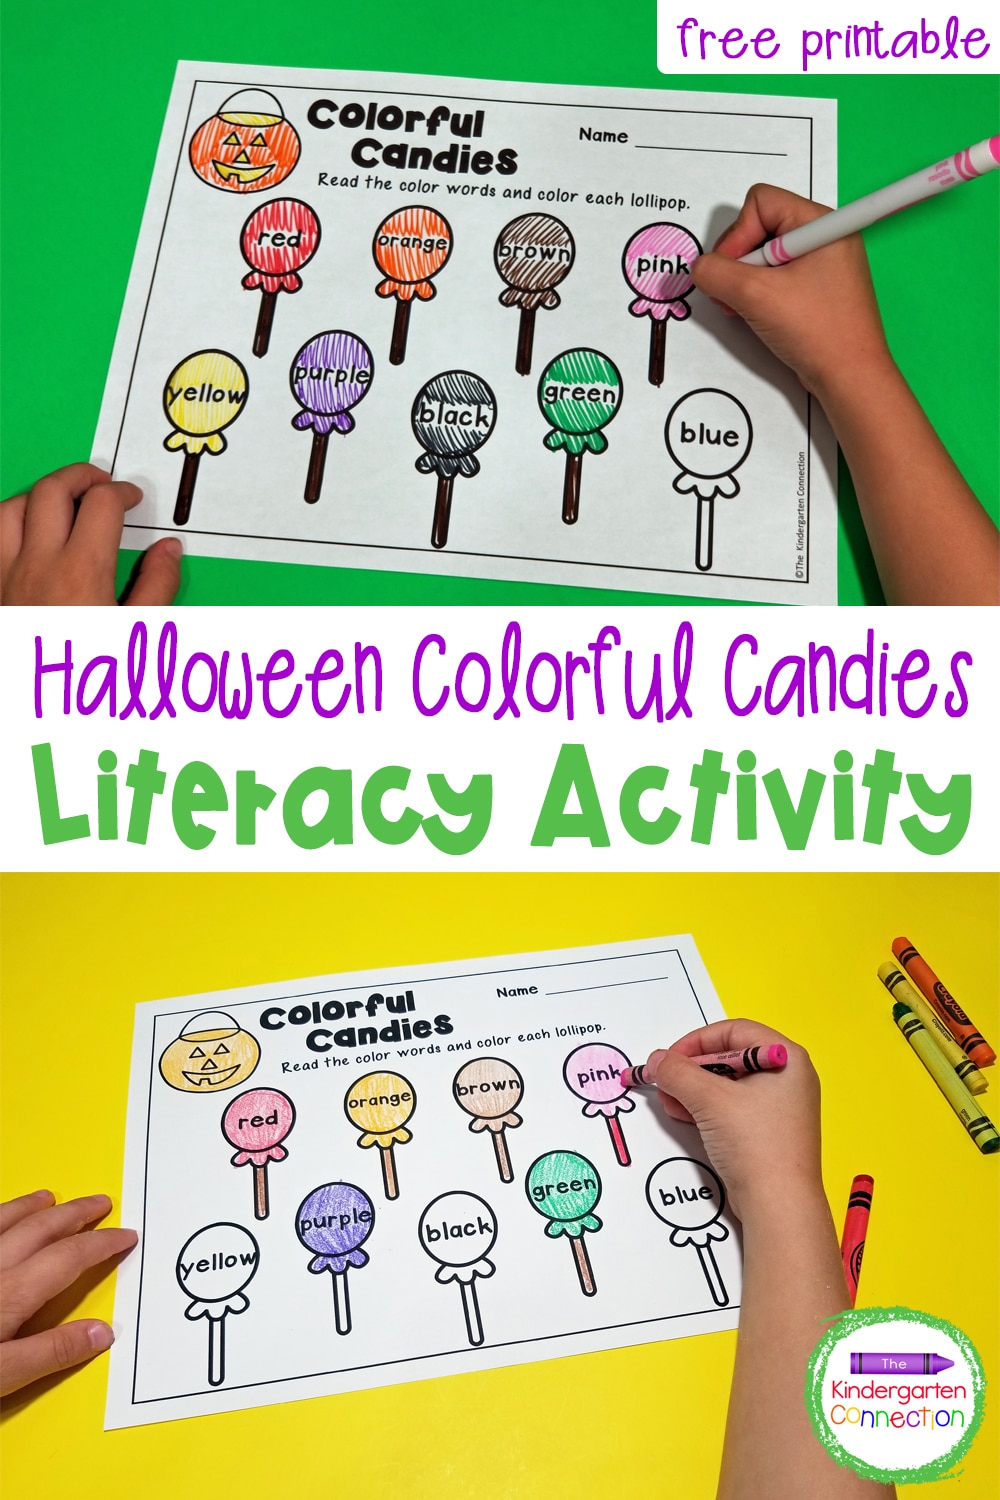 This fun and free Colorful Candies Color Words Activity is perfect for practicing color words in Pre-K and Kindergarten!